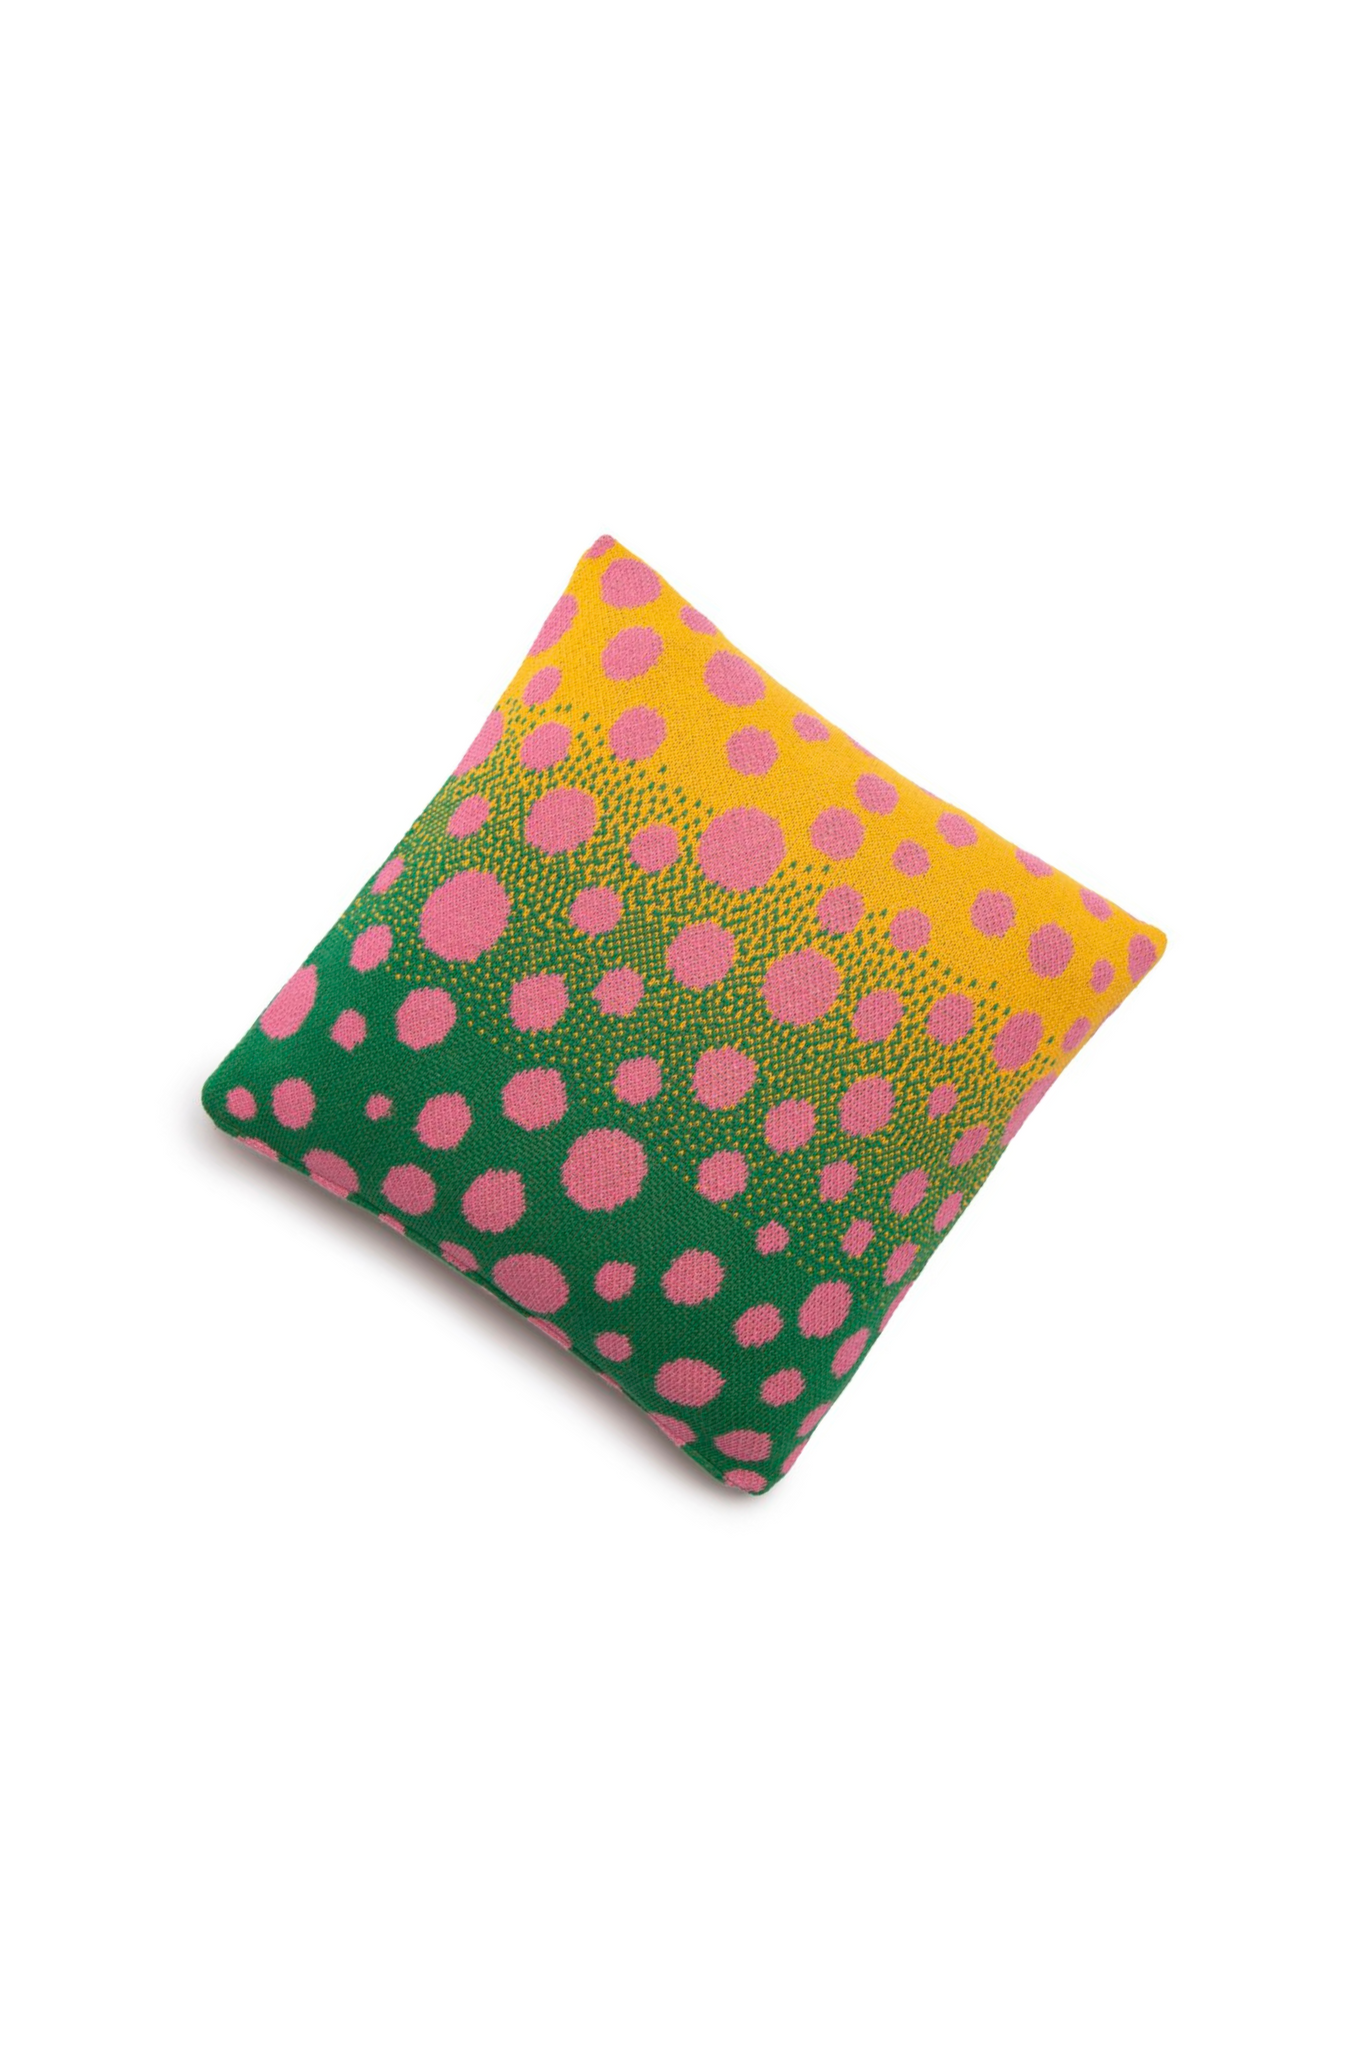 Dot Gradient Pillow Cover by Zoe Schlacter